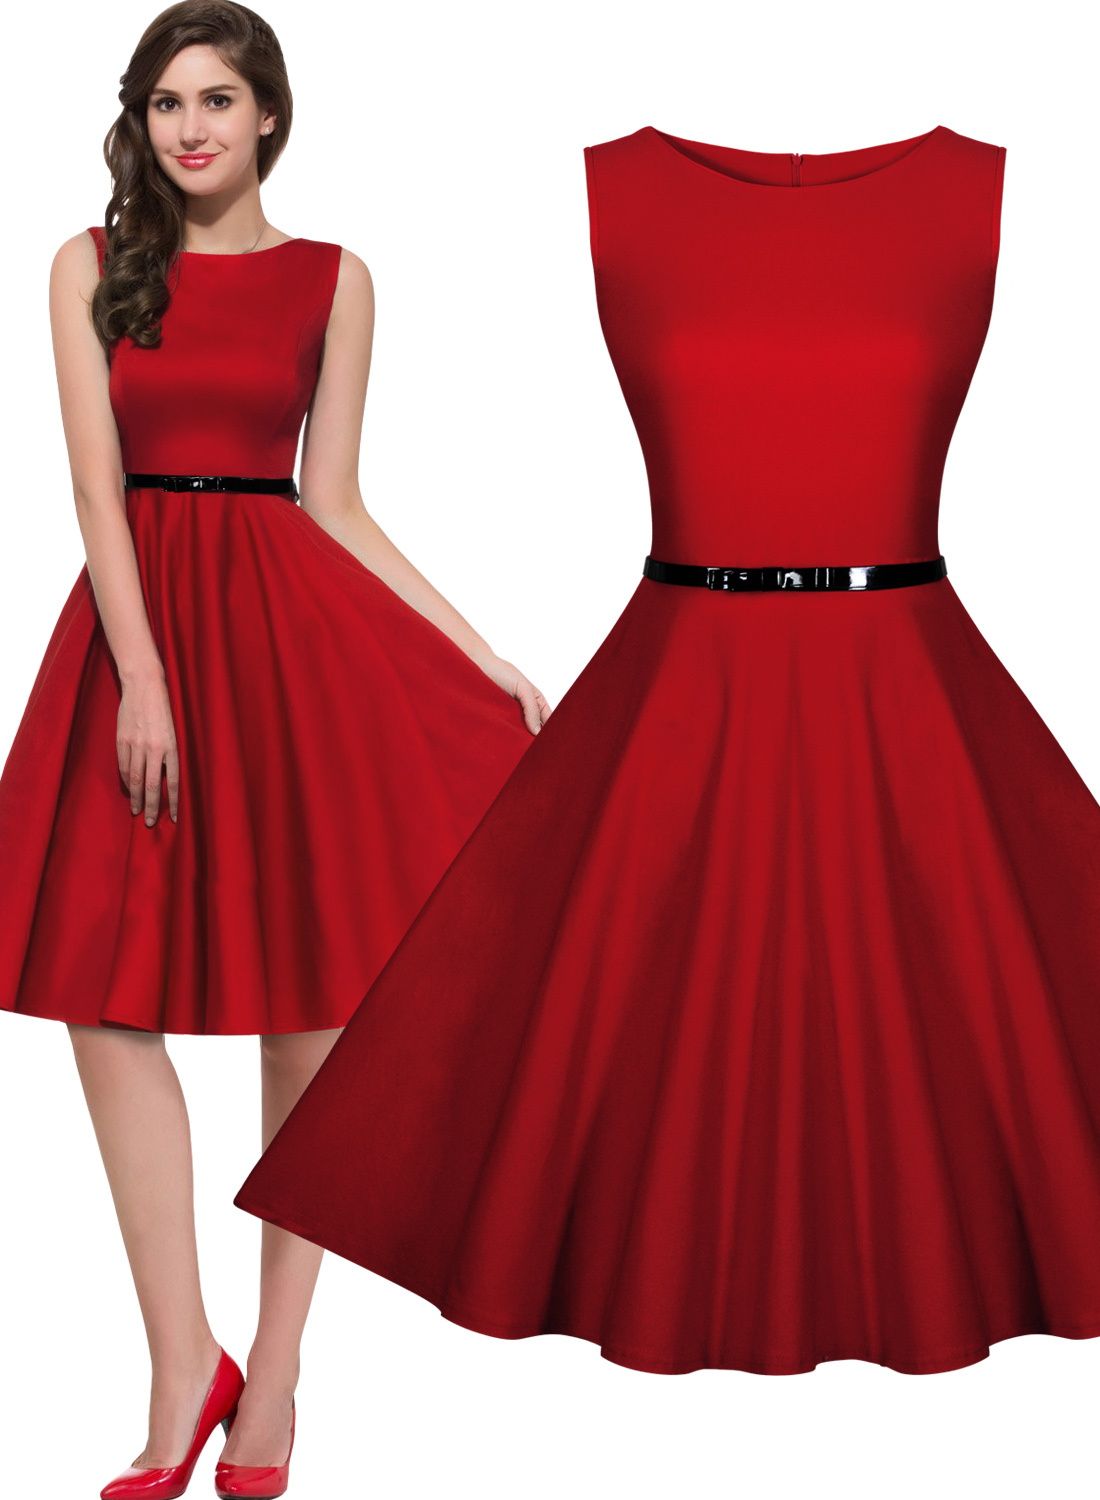 Womens Vintage Rockabilly Swing Skater Dress Evening Party Cocktail Formal Gown 